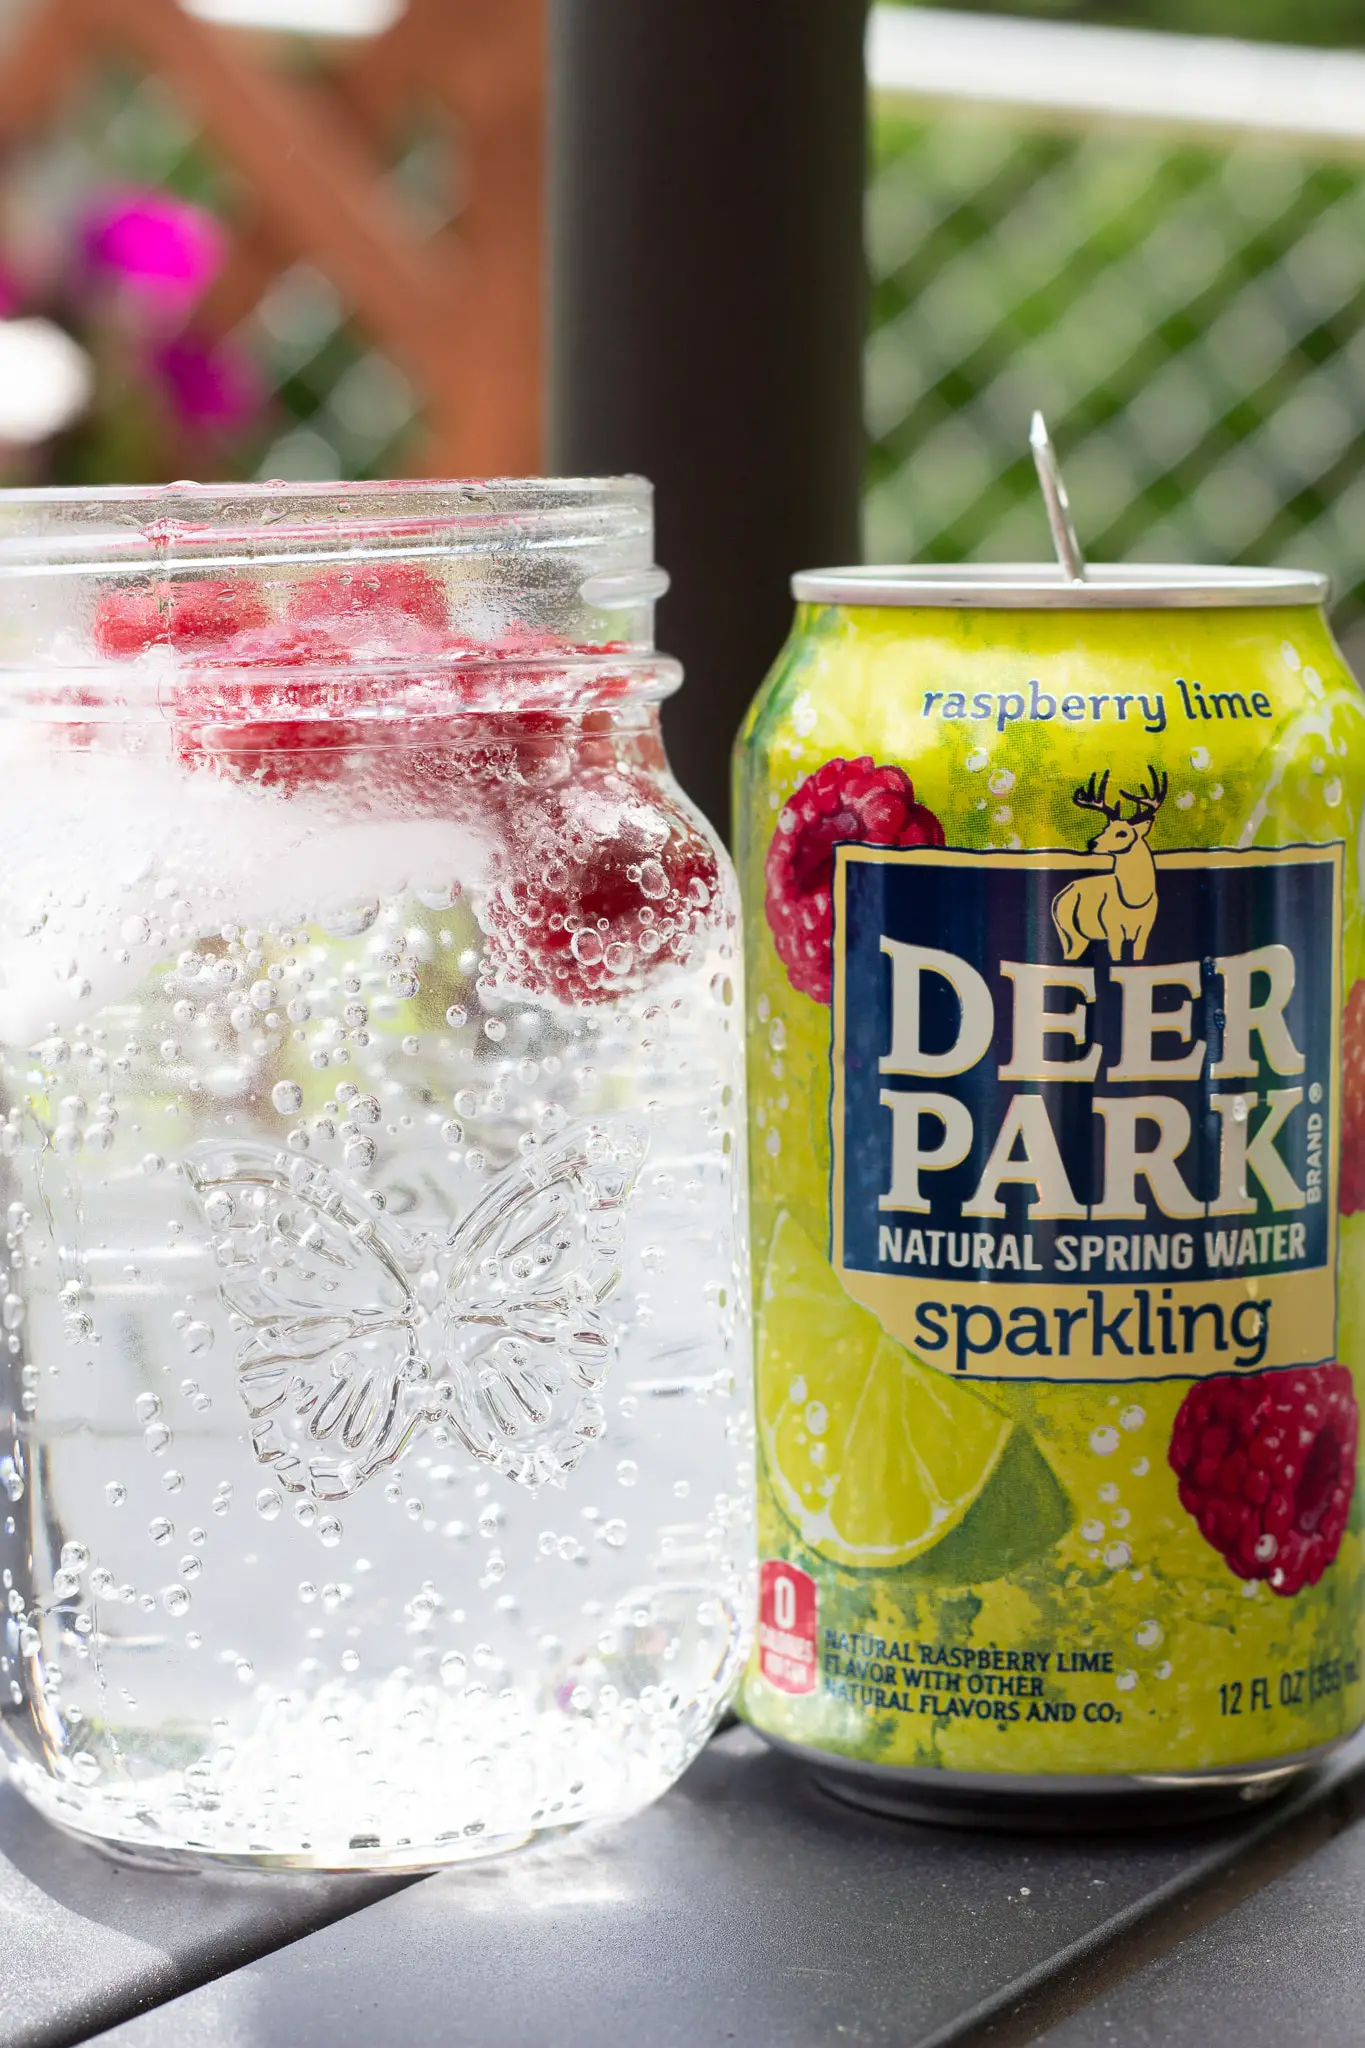 There’s a new sparkling water in town and perfect for Memorial Day: Deer Park